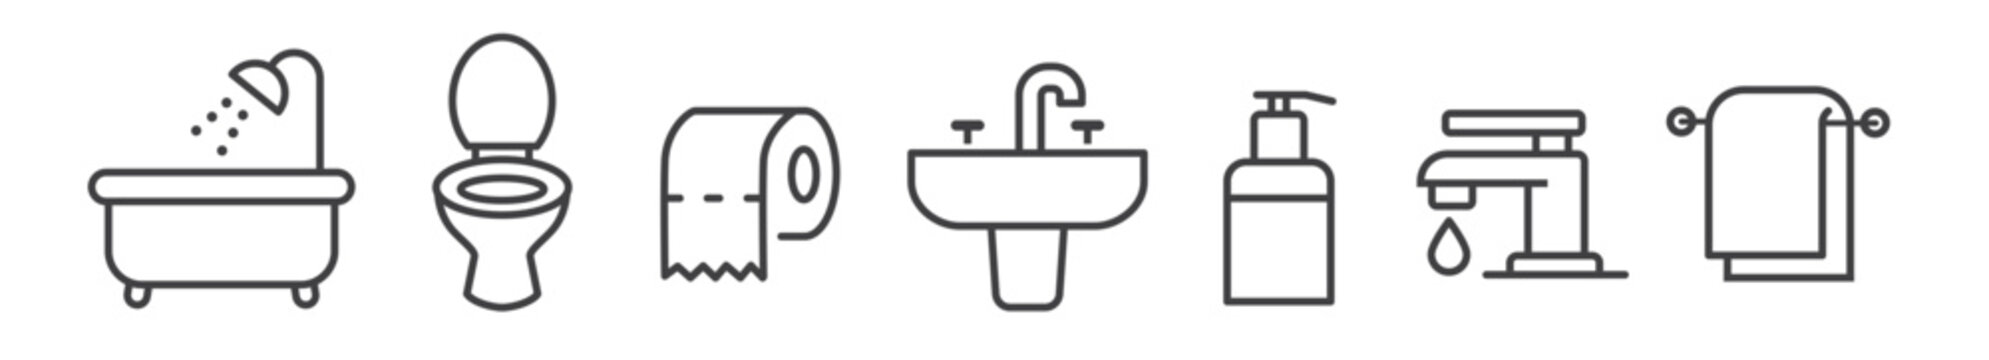 Bathroom, toilet and sink - thin line icon collection on white background